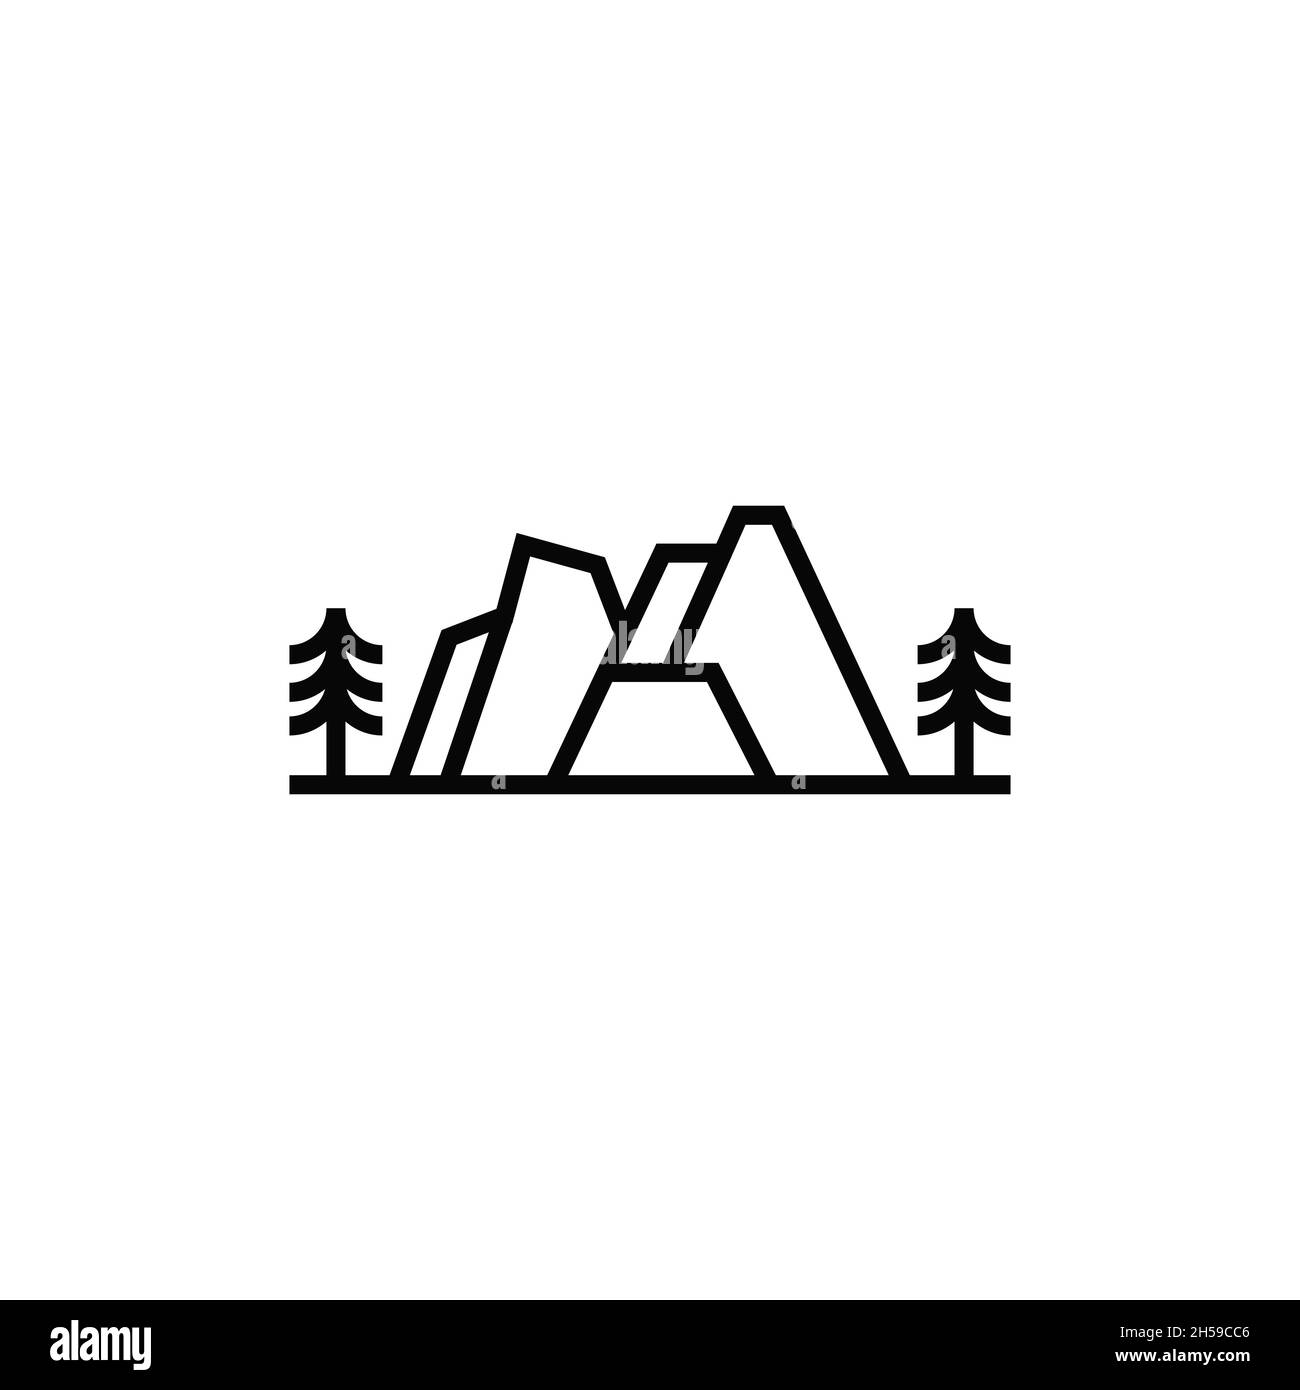 A logo with a mountain shape in a simple line art style. Stock Vector